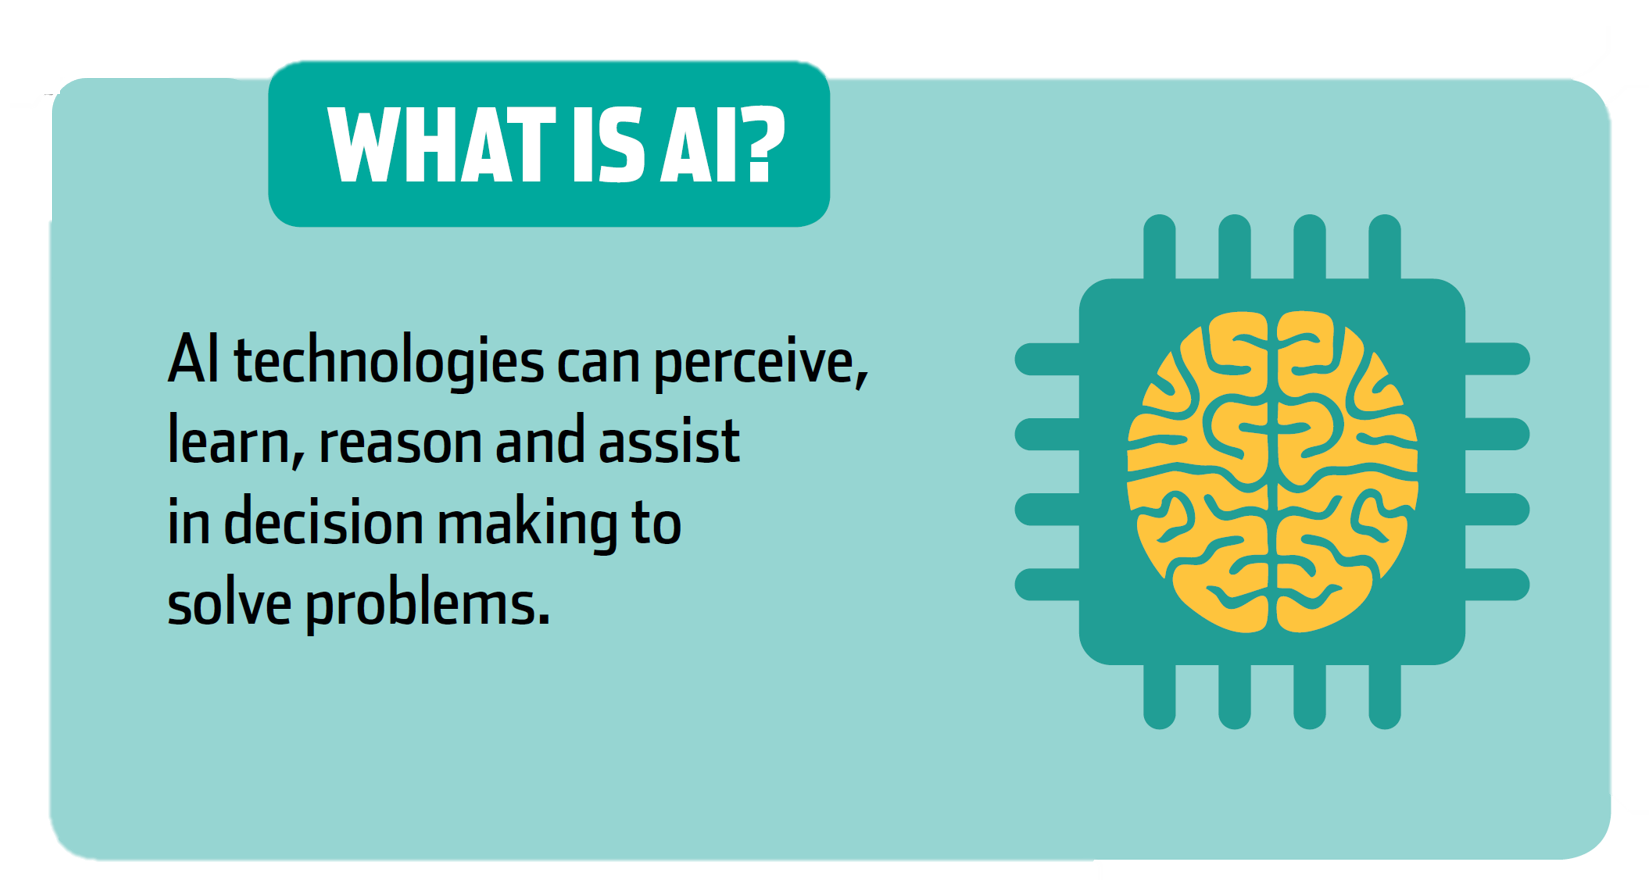 Graphic showing what AI is. AI technology can perceive, learn, reason and assist in decision making to solve problems.